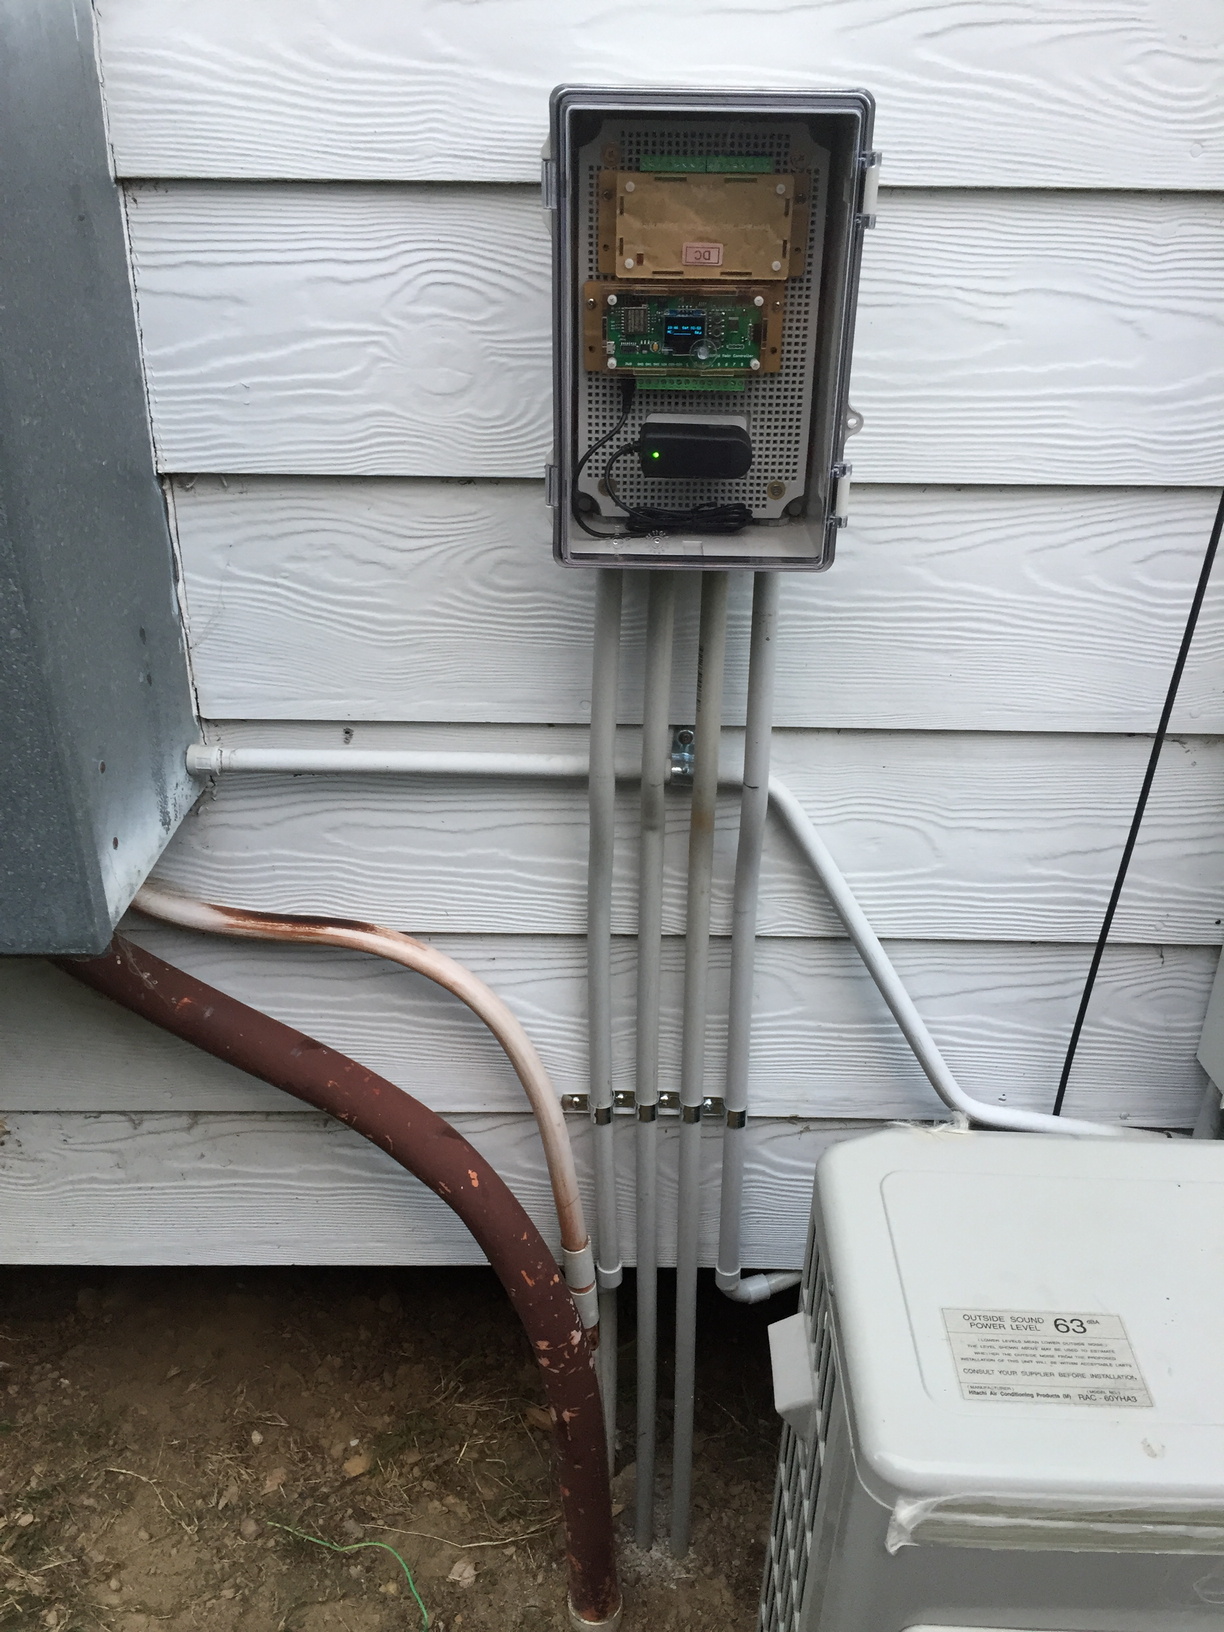 The final product, all wired in and closed up. Huge thanks to my father-in-law for doing such a neat job with the electrical conduit, even using a flame-torch to heat and bend the conduit so it sits neatly over the conduit going to the air-conditioner.